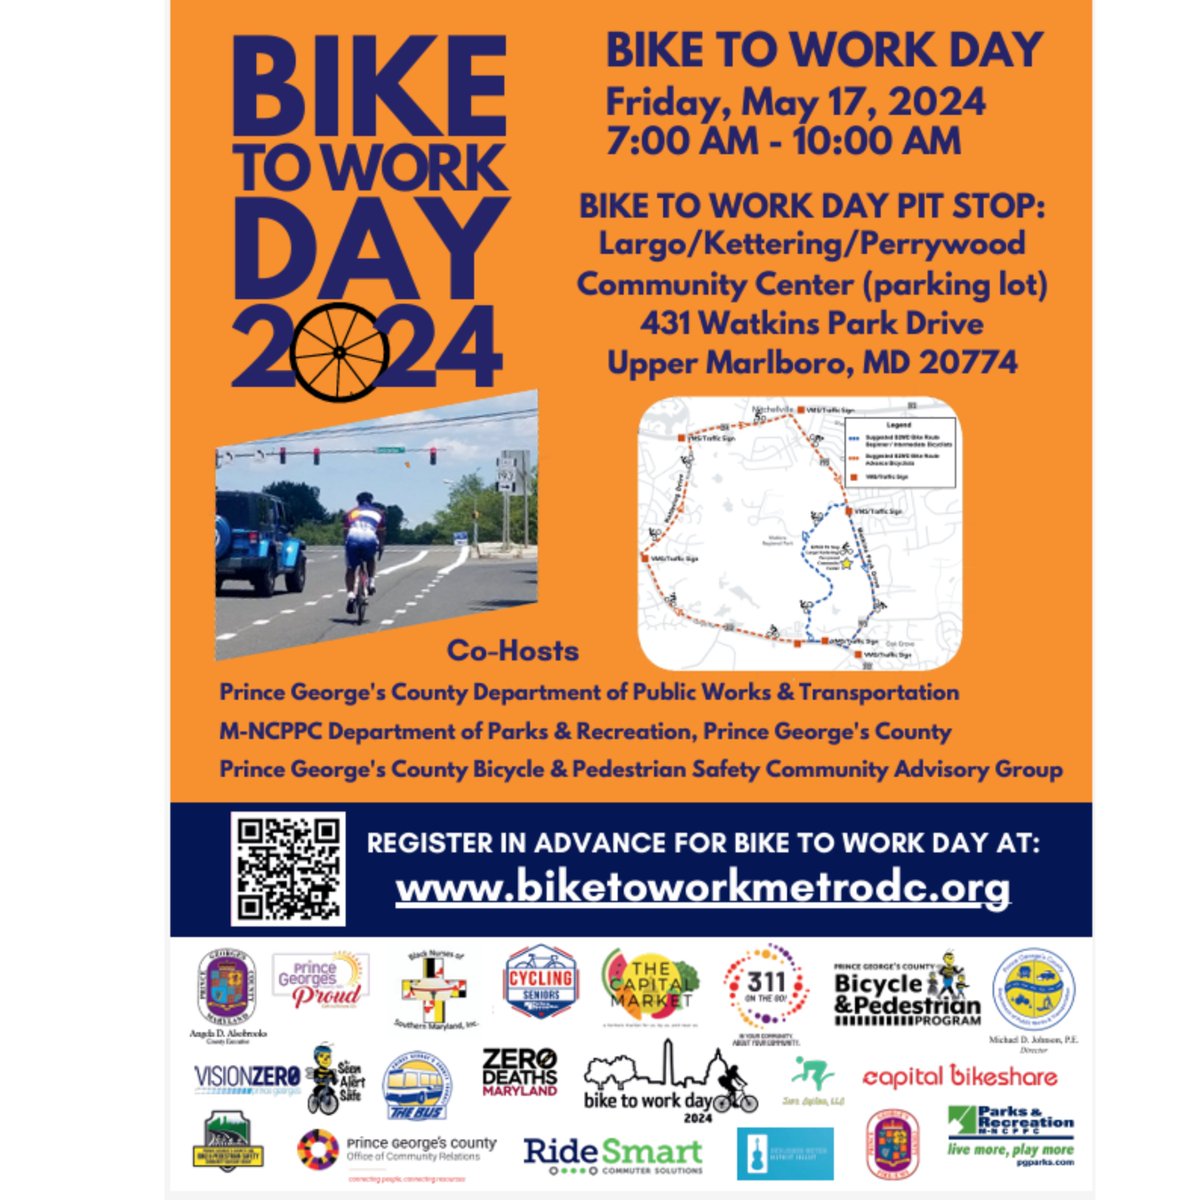 DPW&T is partnering with M-NCPPC and the Prince George’s Countywide Bicycle & Pedestrian Safety Community Advisory Group to host a #BikeToWorkDay Pit Stop at the Kettering/Perrywood Community Center, 431 Watkins Park Drive in Upper Marlboro, MD from 7 AM to 10 AM on May 17, 2024!